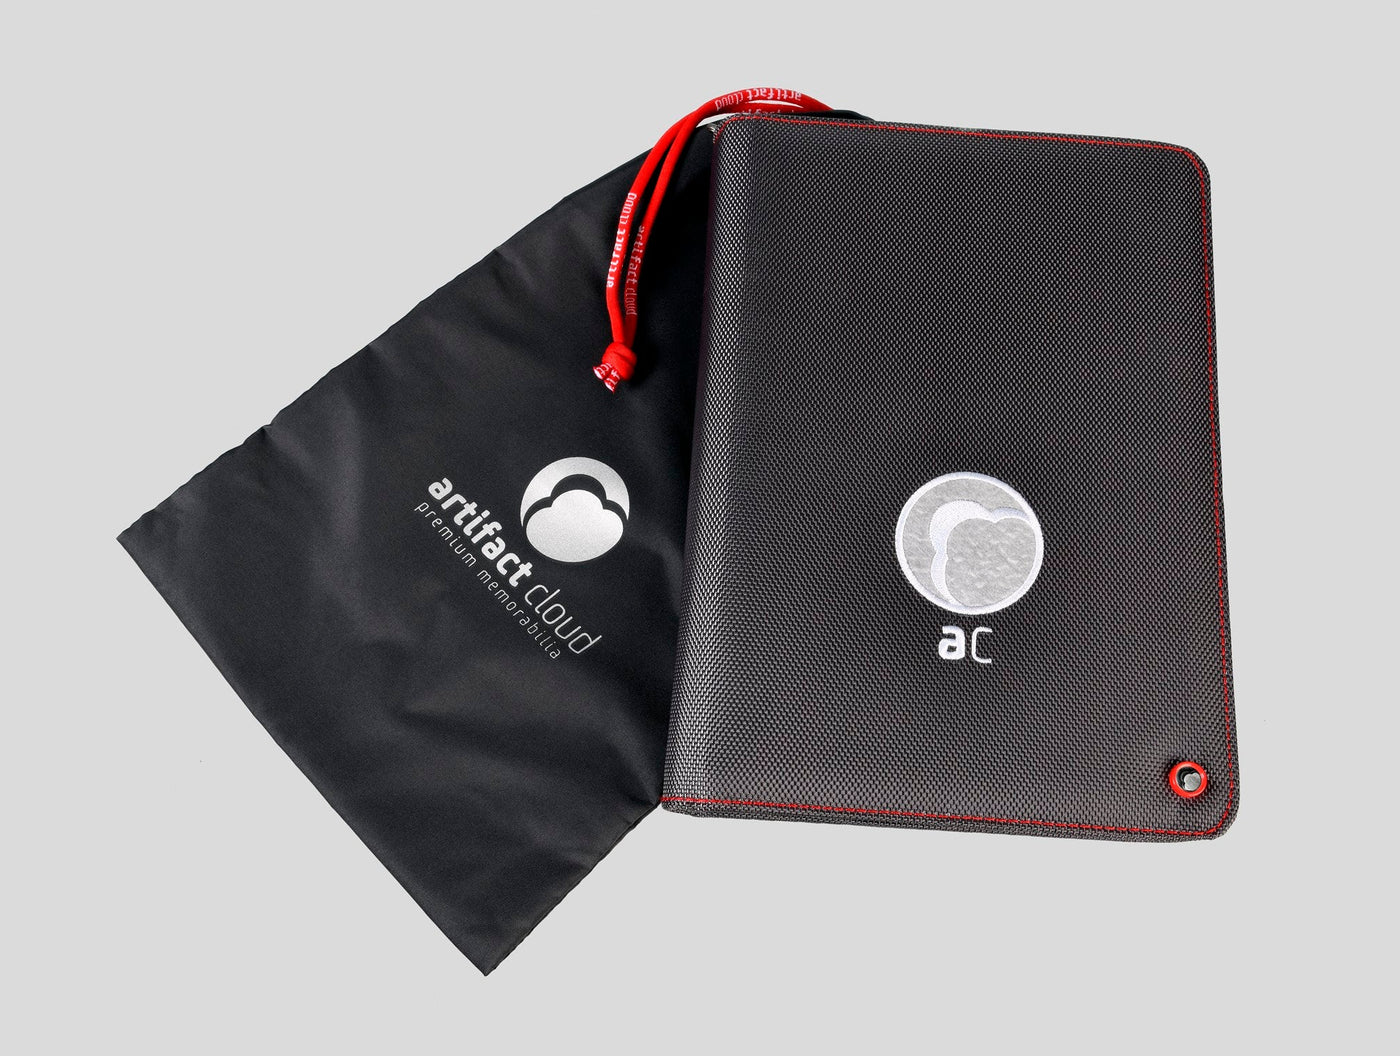 Notebook folder from our "Artifactcloud" apparel collection. With iPad holder inside.